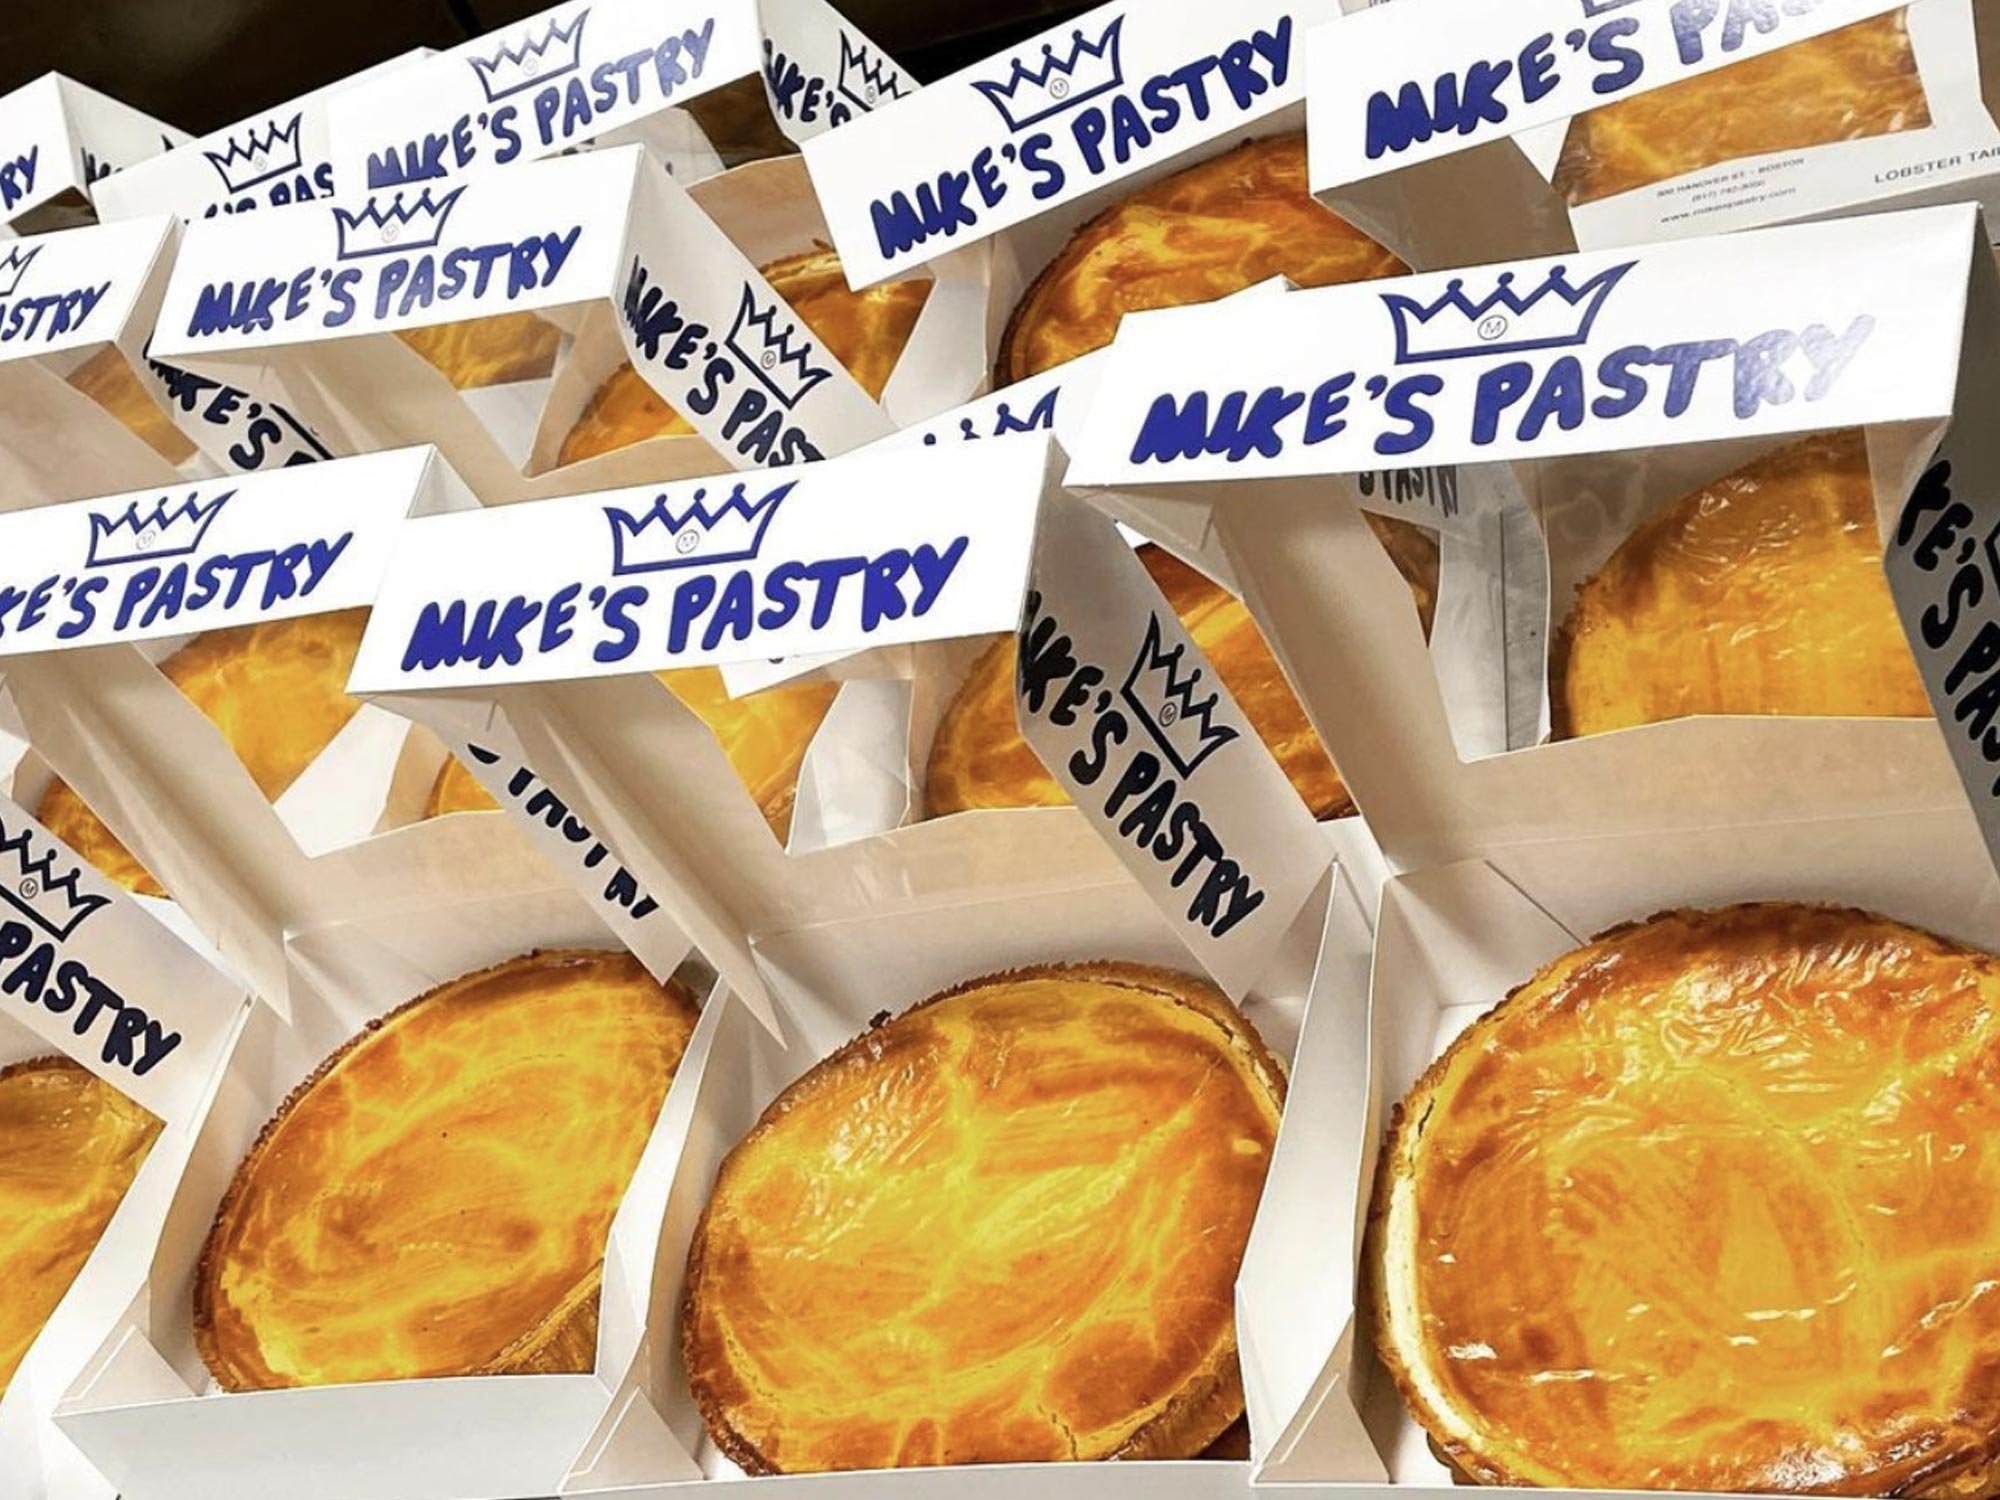 Boston Restaurants with great logos and branding Mike's Pastry